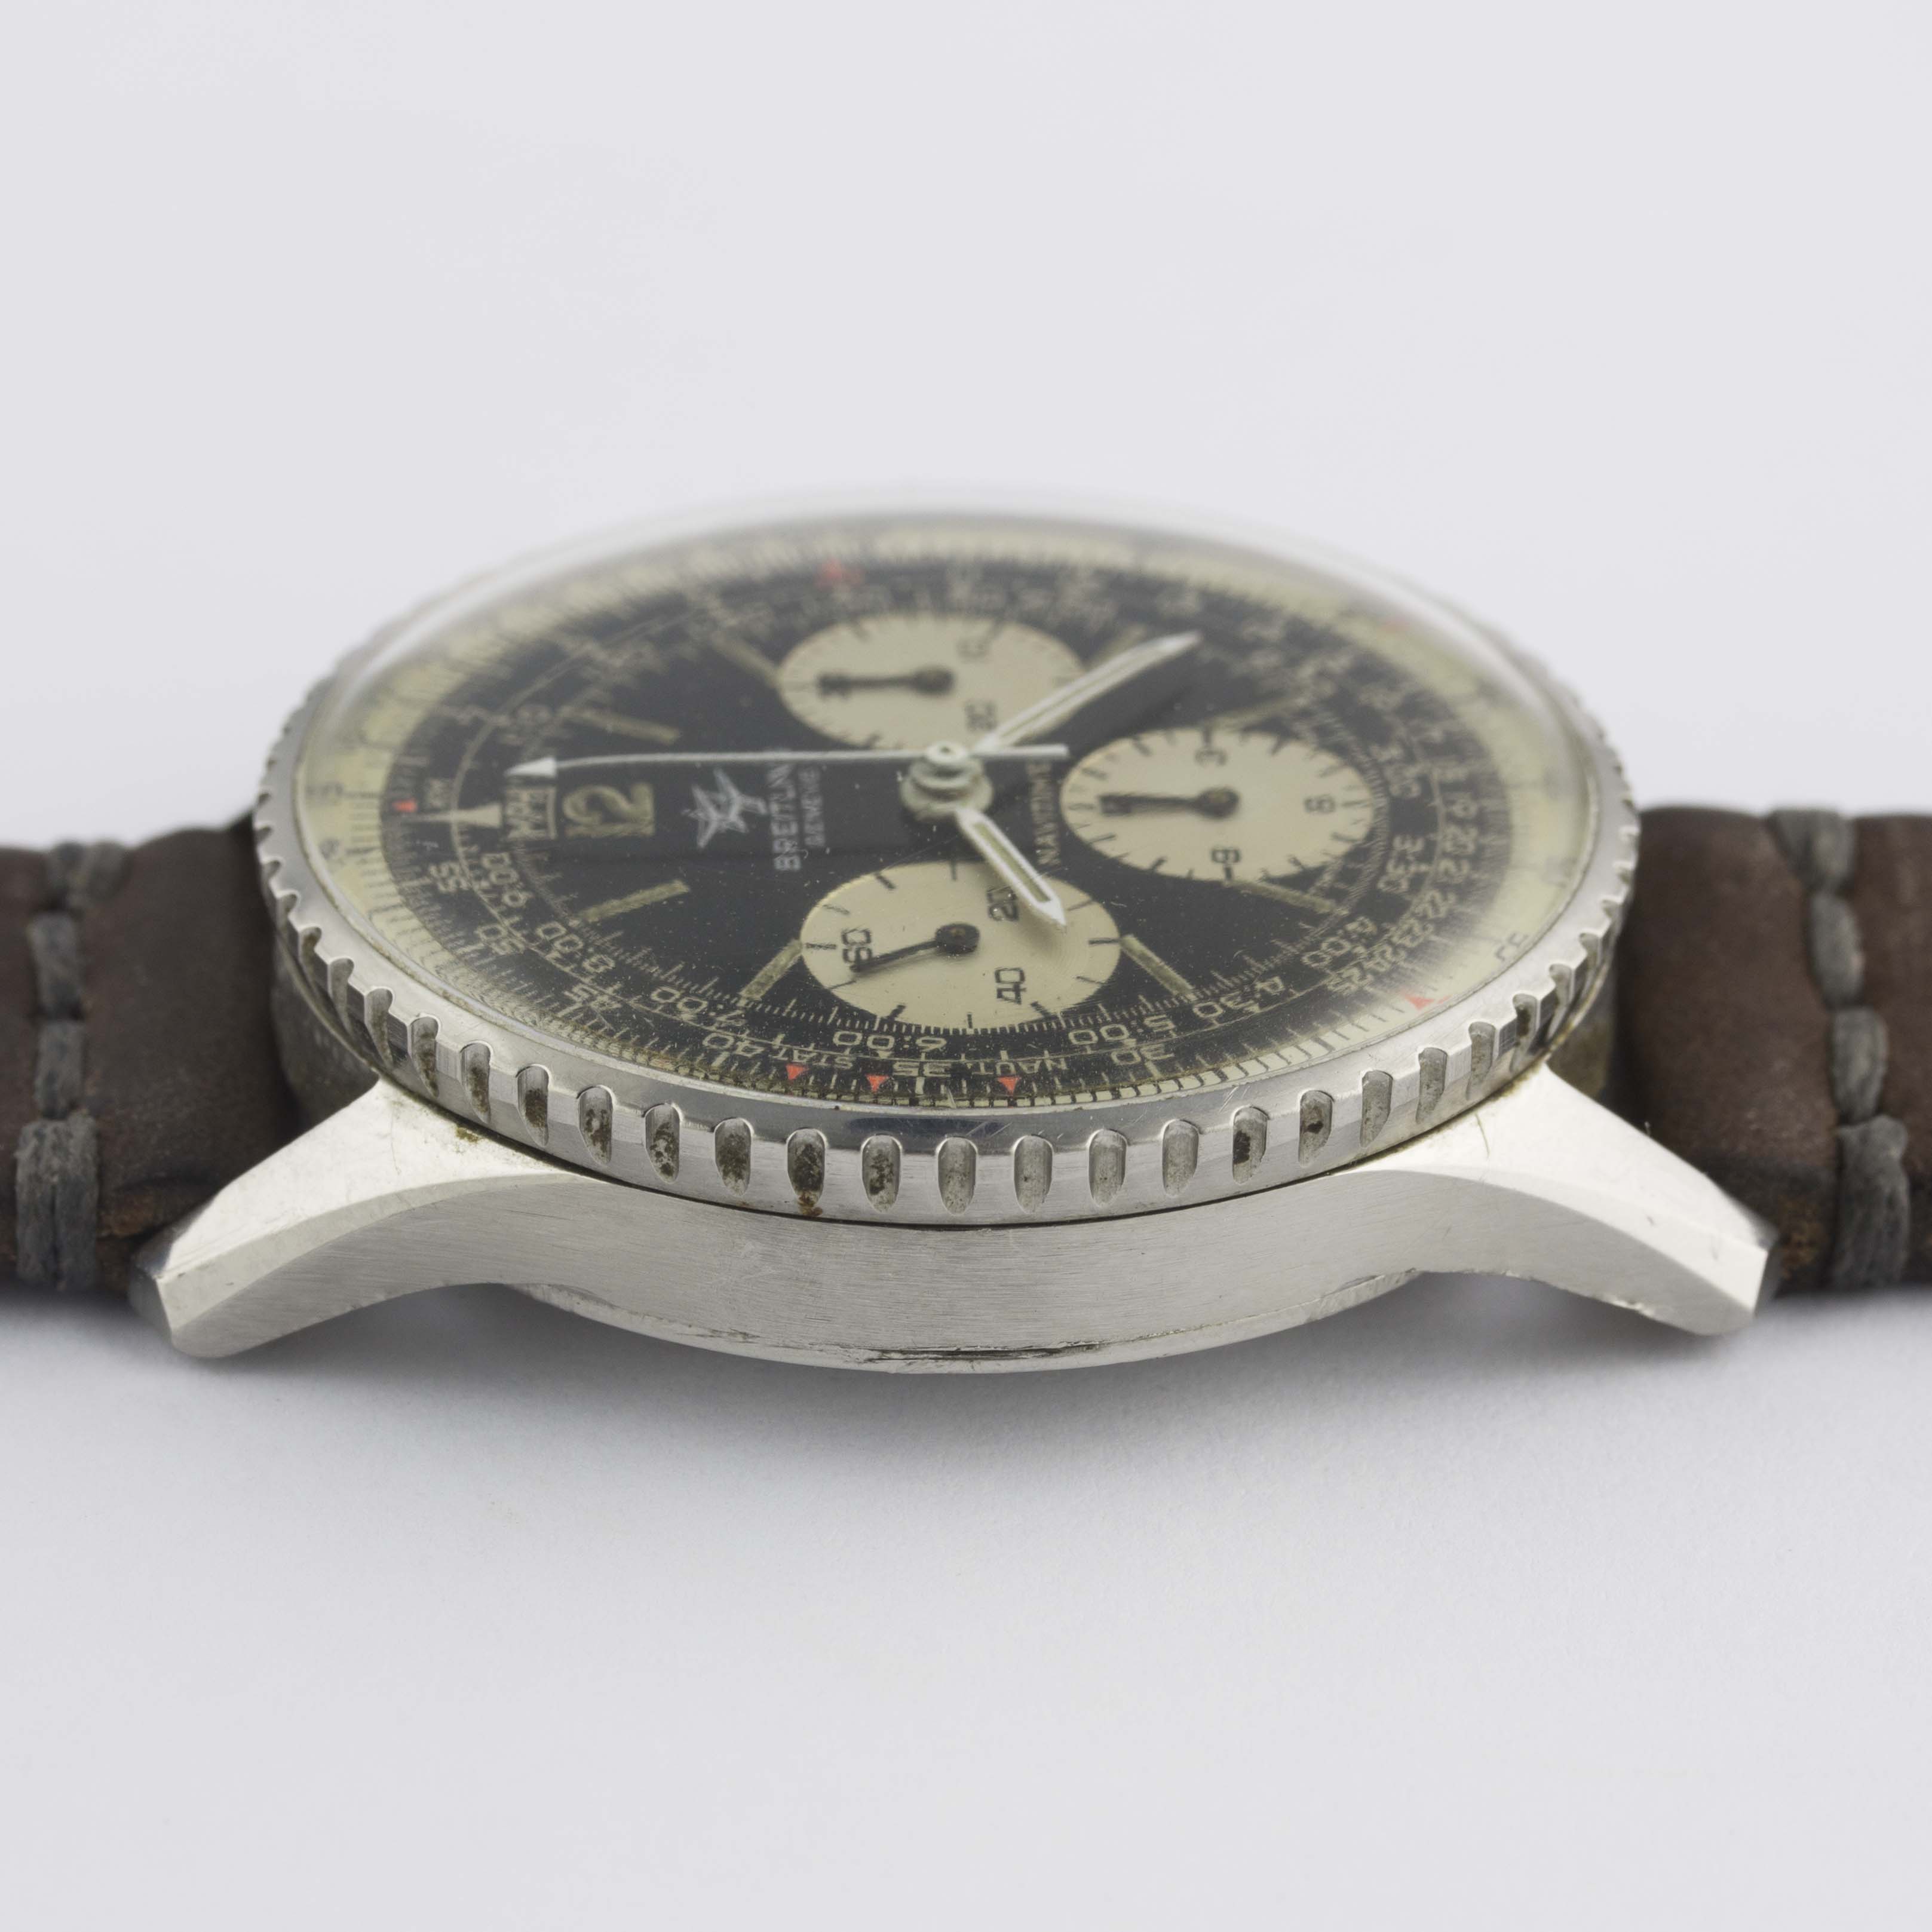 A GENTLEMAN'S STAINLESS STEEL BREITLING NAVITIMER CHRONOGRAPH WRIST WATCH CIRCA 1969, REF. 806 - Image 11 of 11